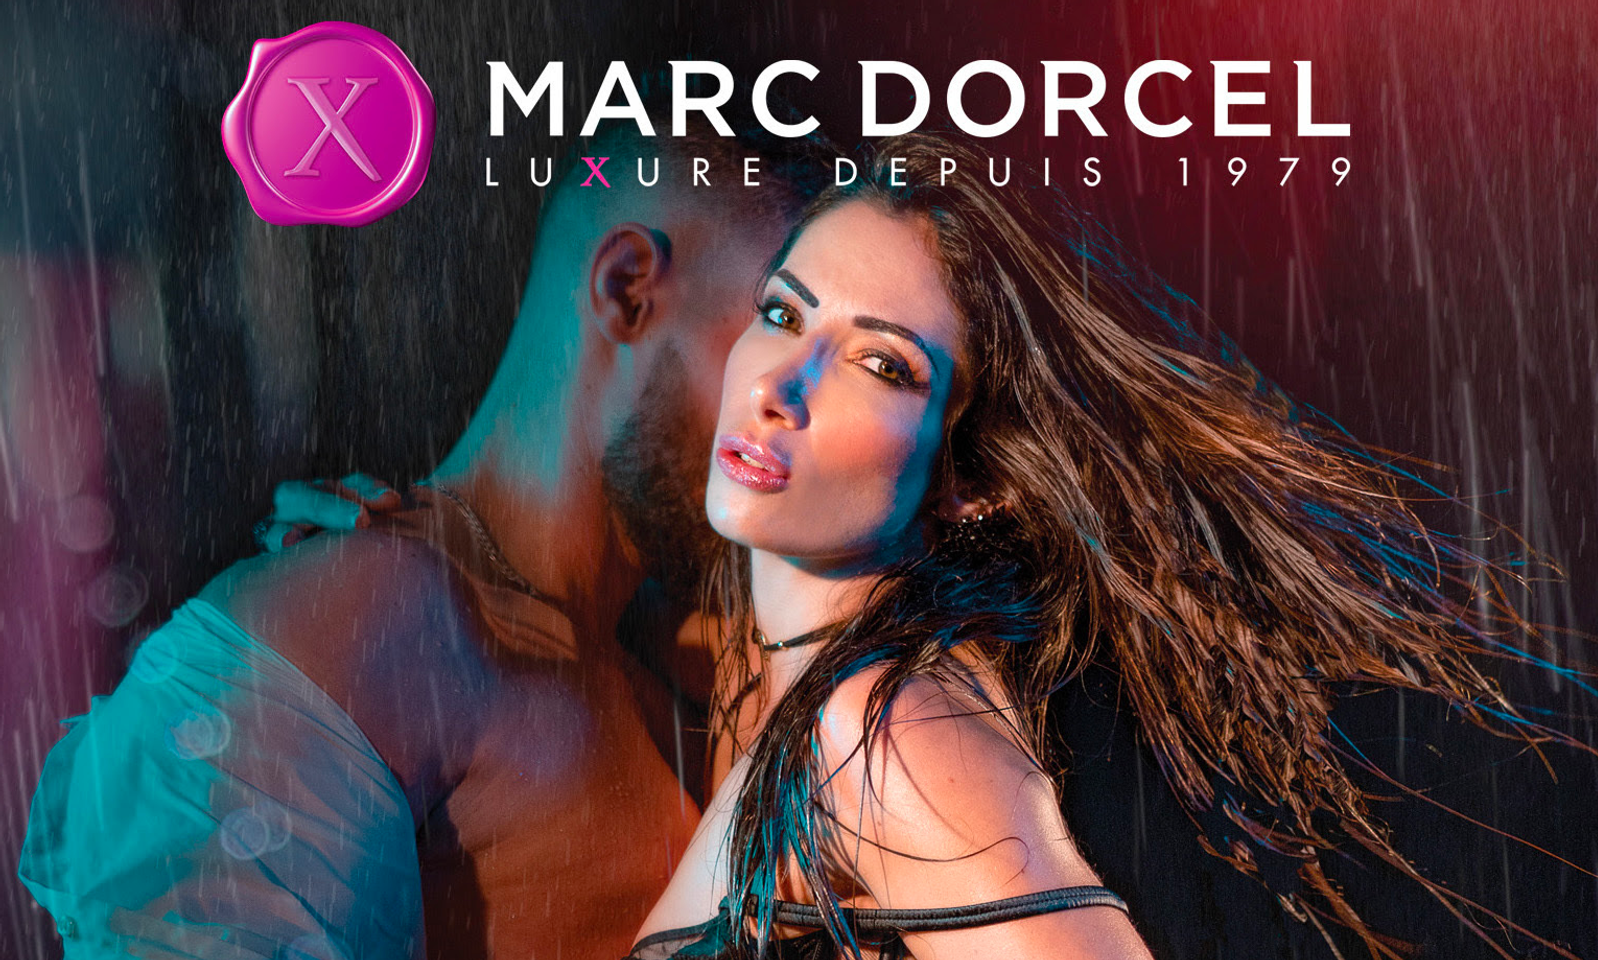 Clea Gaultier and Tiffany Tatum Showcased in New Dorcel Titles